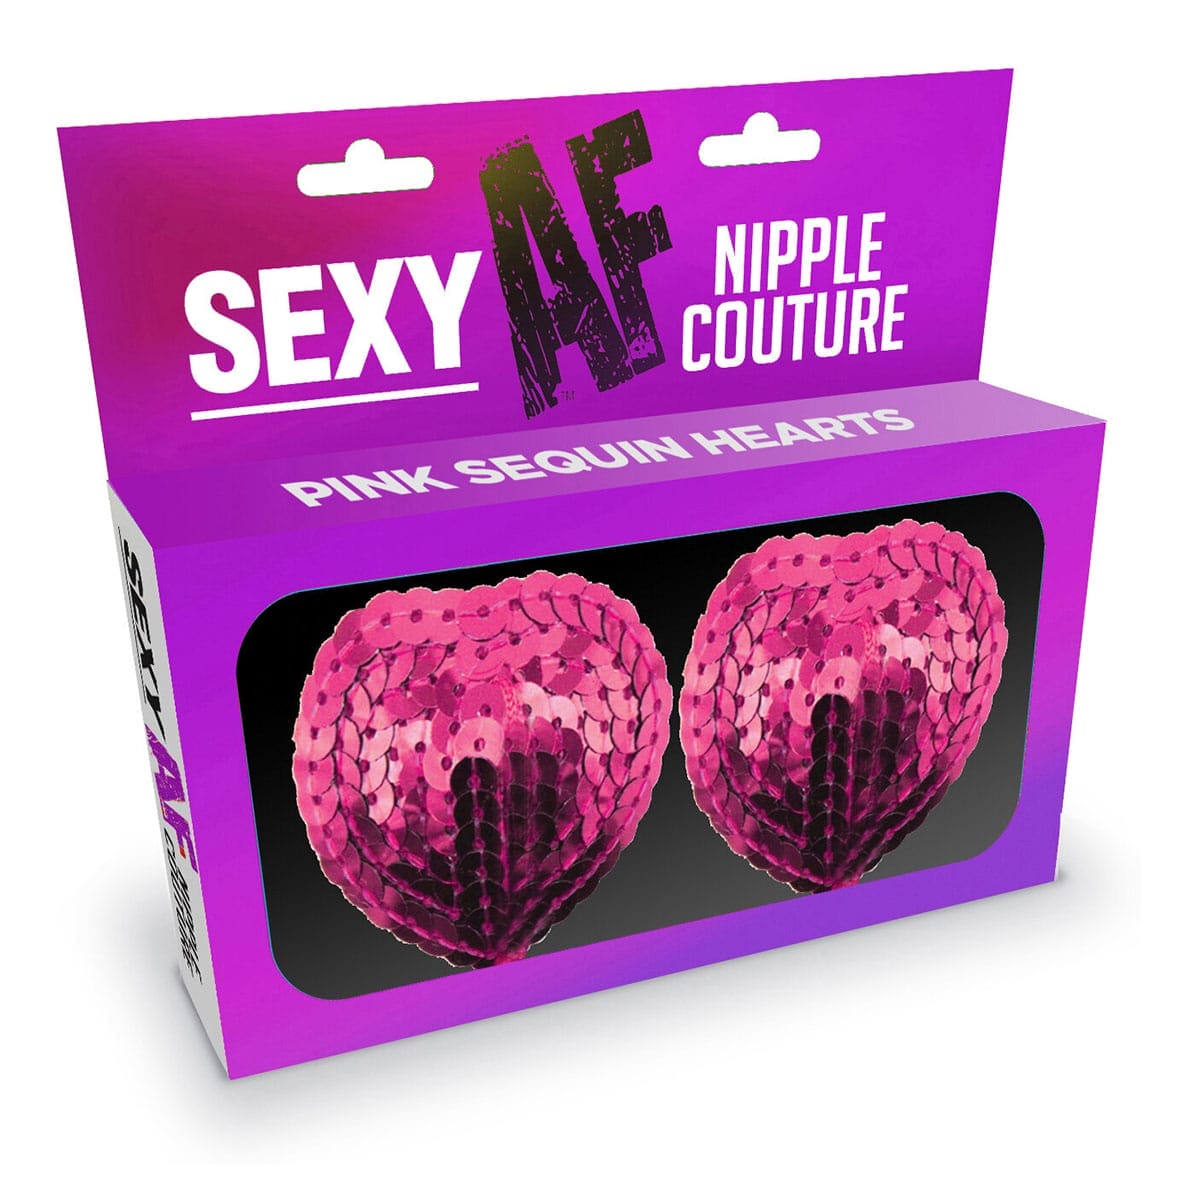 Wear Sexy AF Nipple Couture - Pink Sequin Hearts nipple covers.